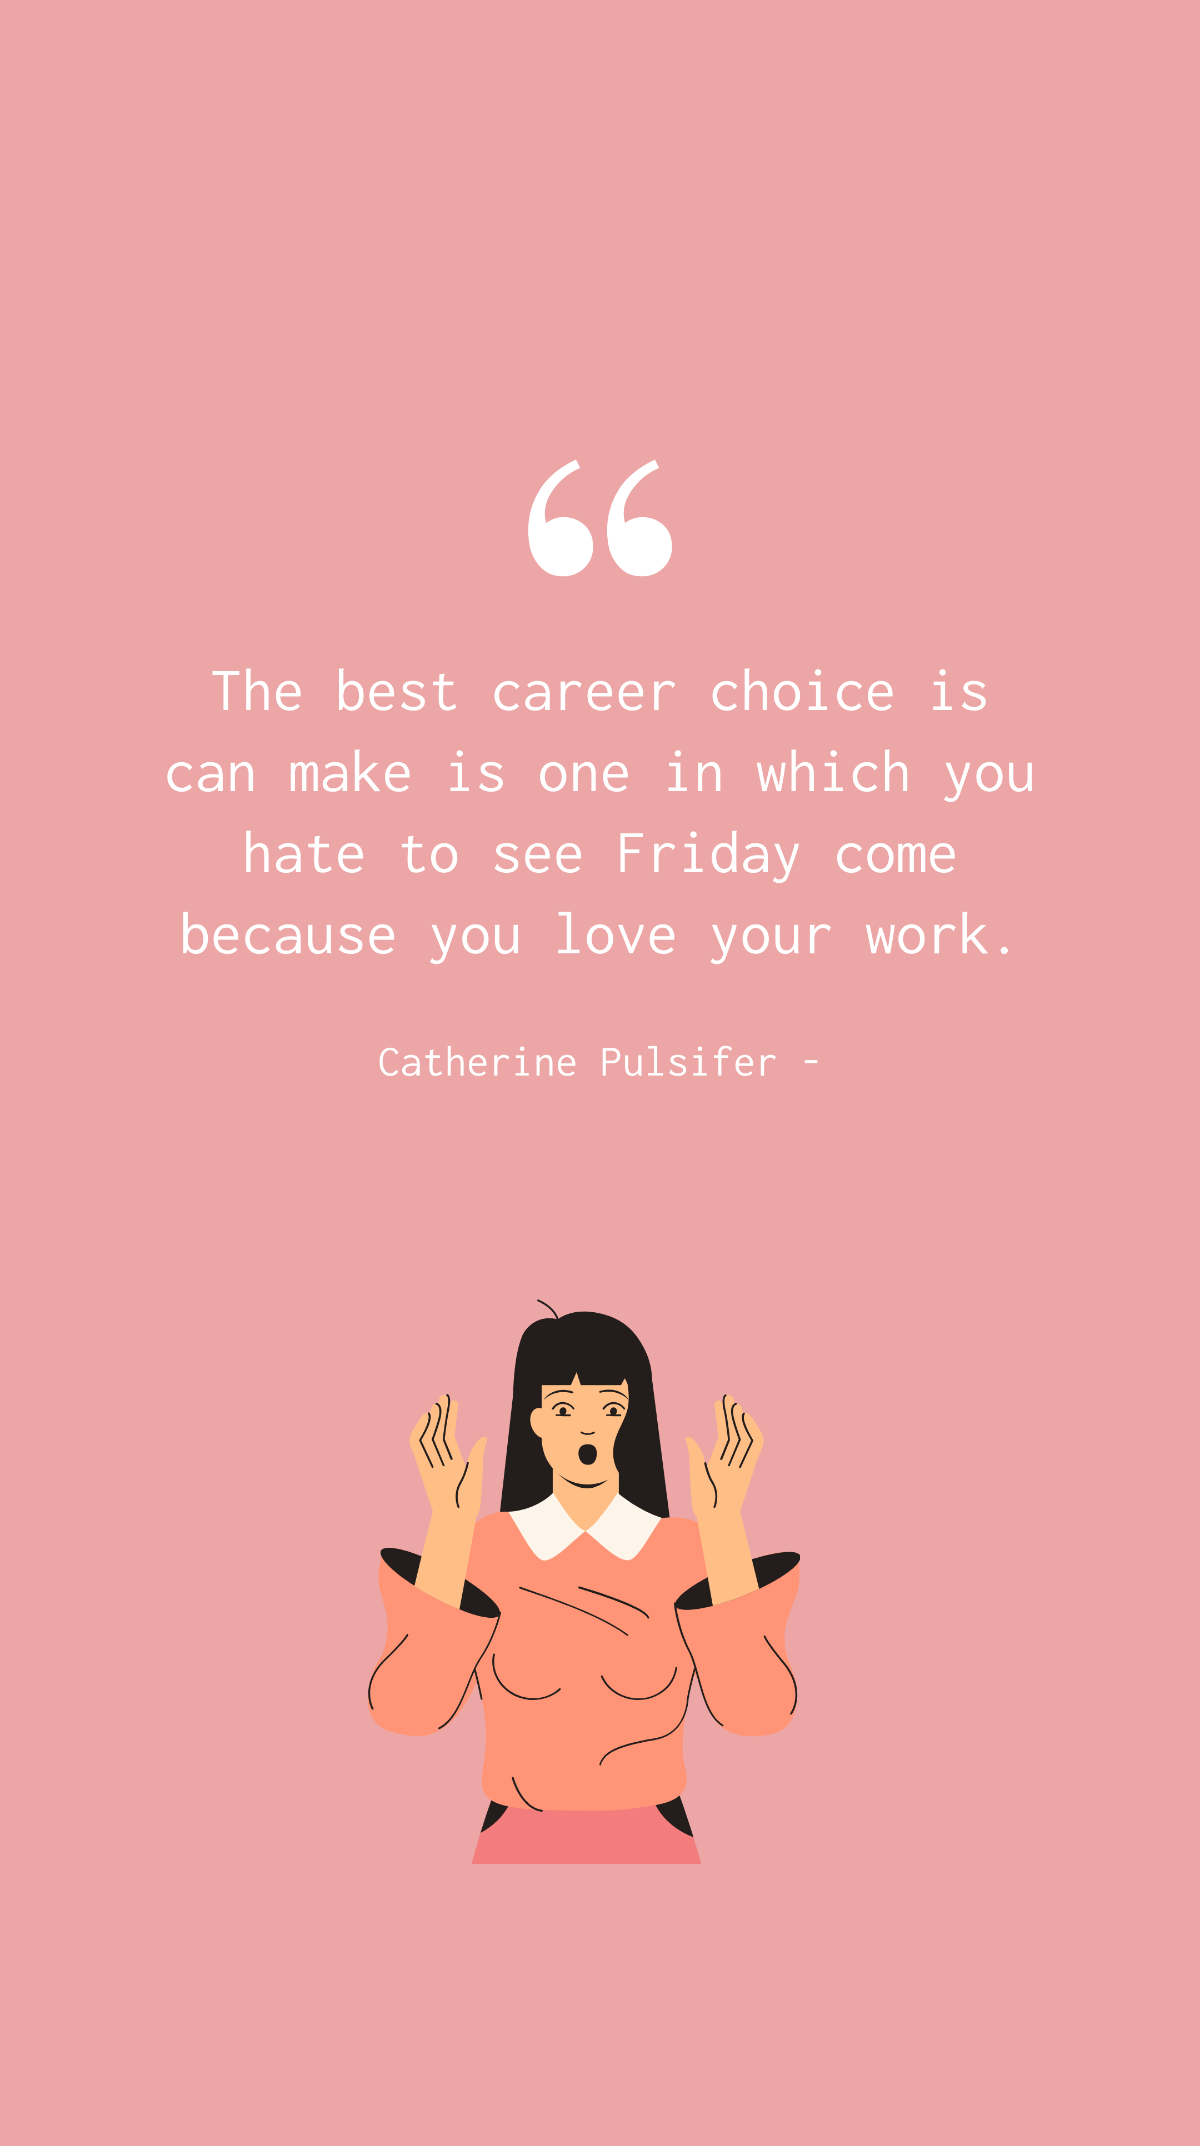 Catherine Pulsifer - The best career choice is can make is one in which you hate to see Friday come because you love your work.